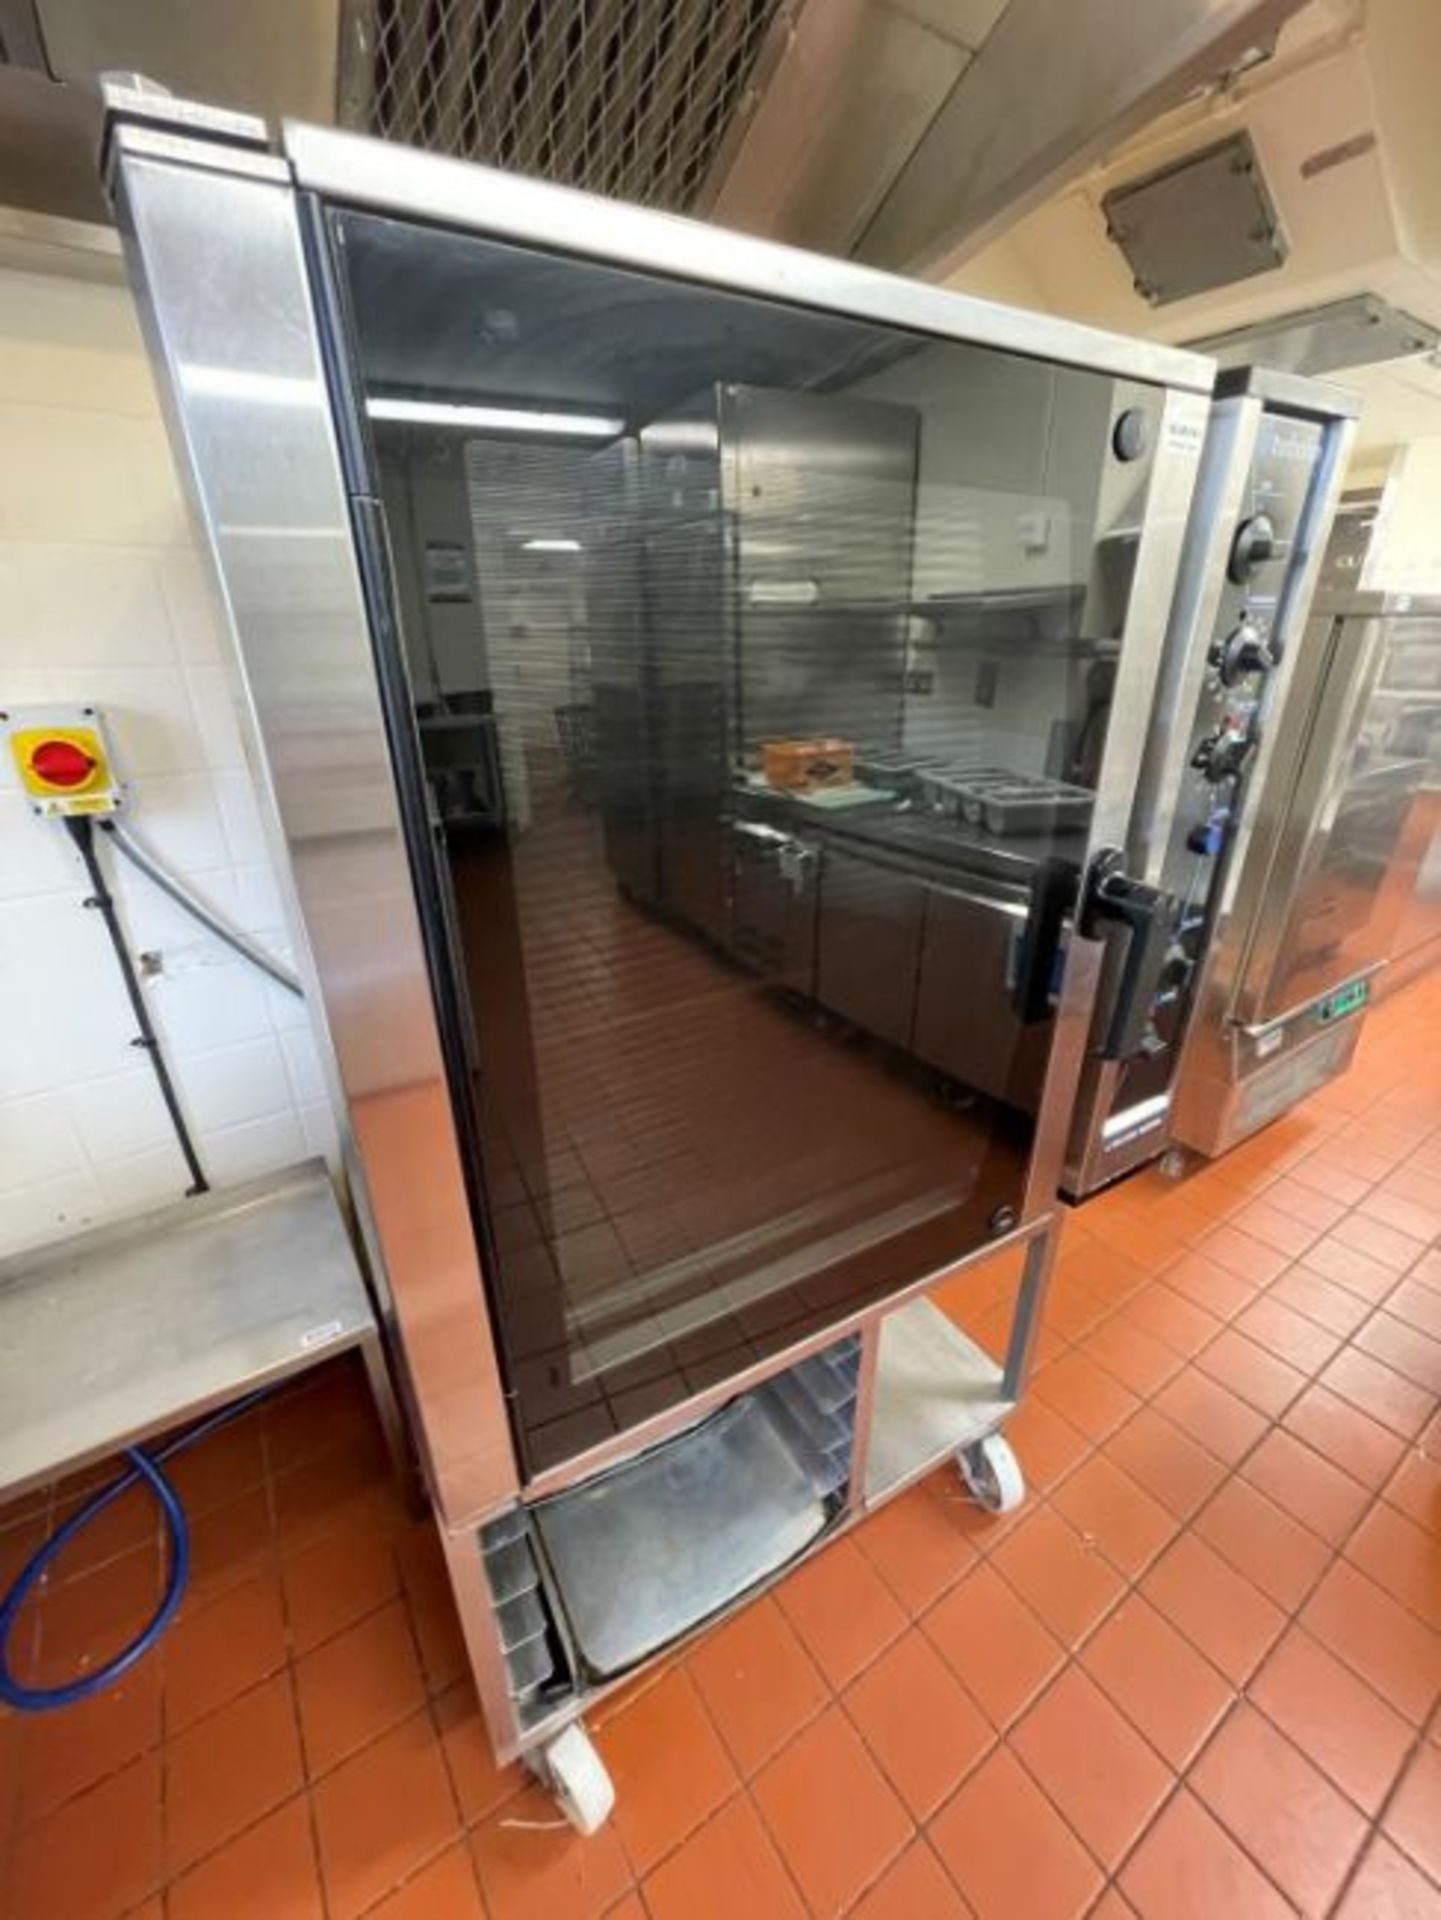 1 x Blue Seal Moffat Turbofan E35 Convection Oven With Stand - Model E35-30-453 - 400v Power - - Image 9 of 16